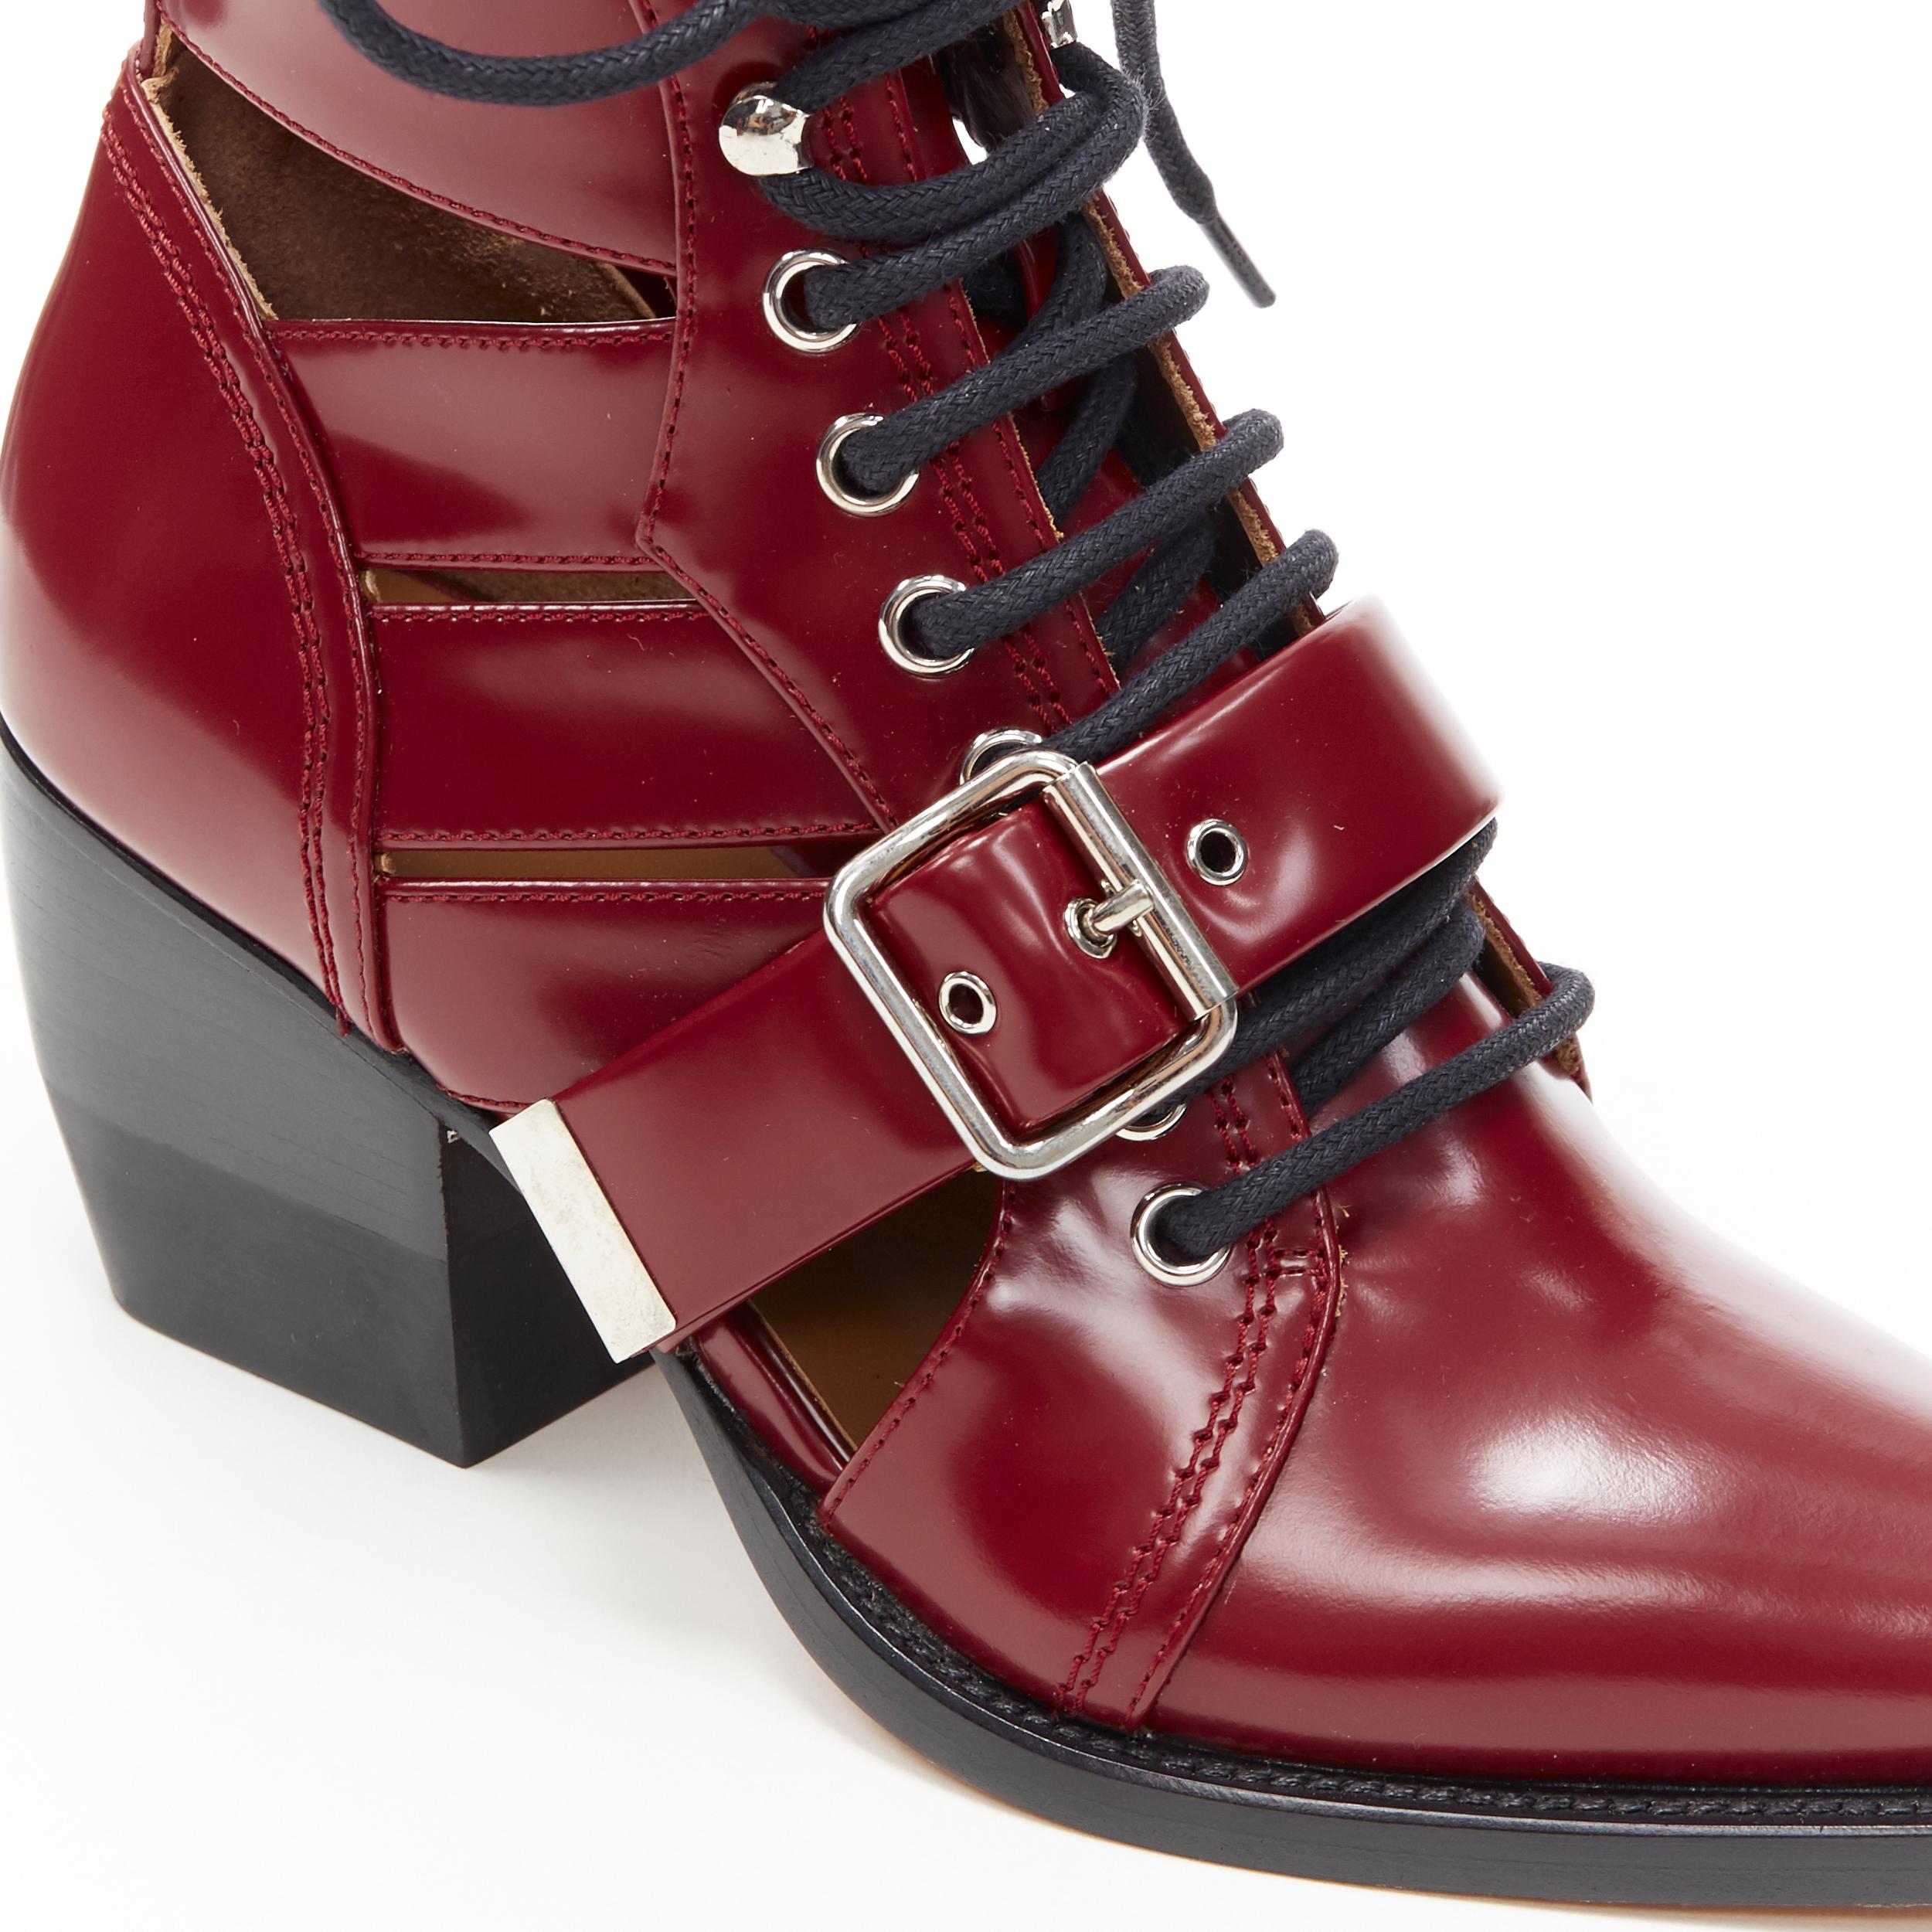 new CHLOE Rylee burgundy red leather cut out buckled pointy ankle boot EU39.5 4